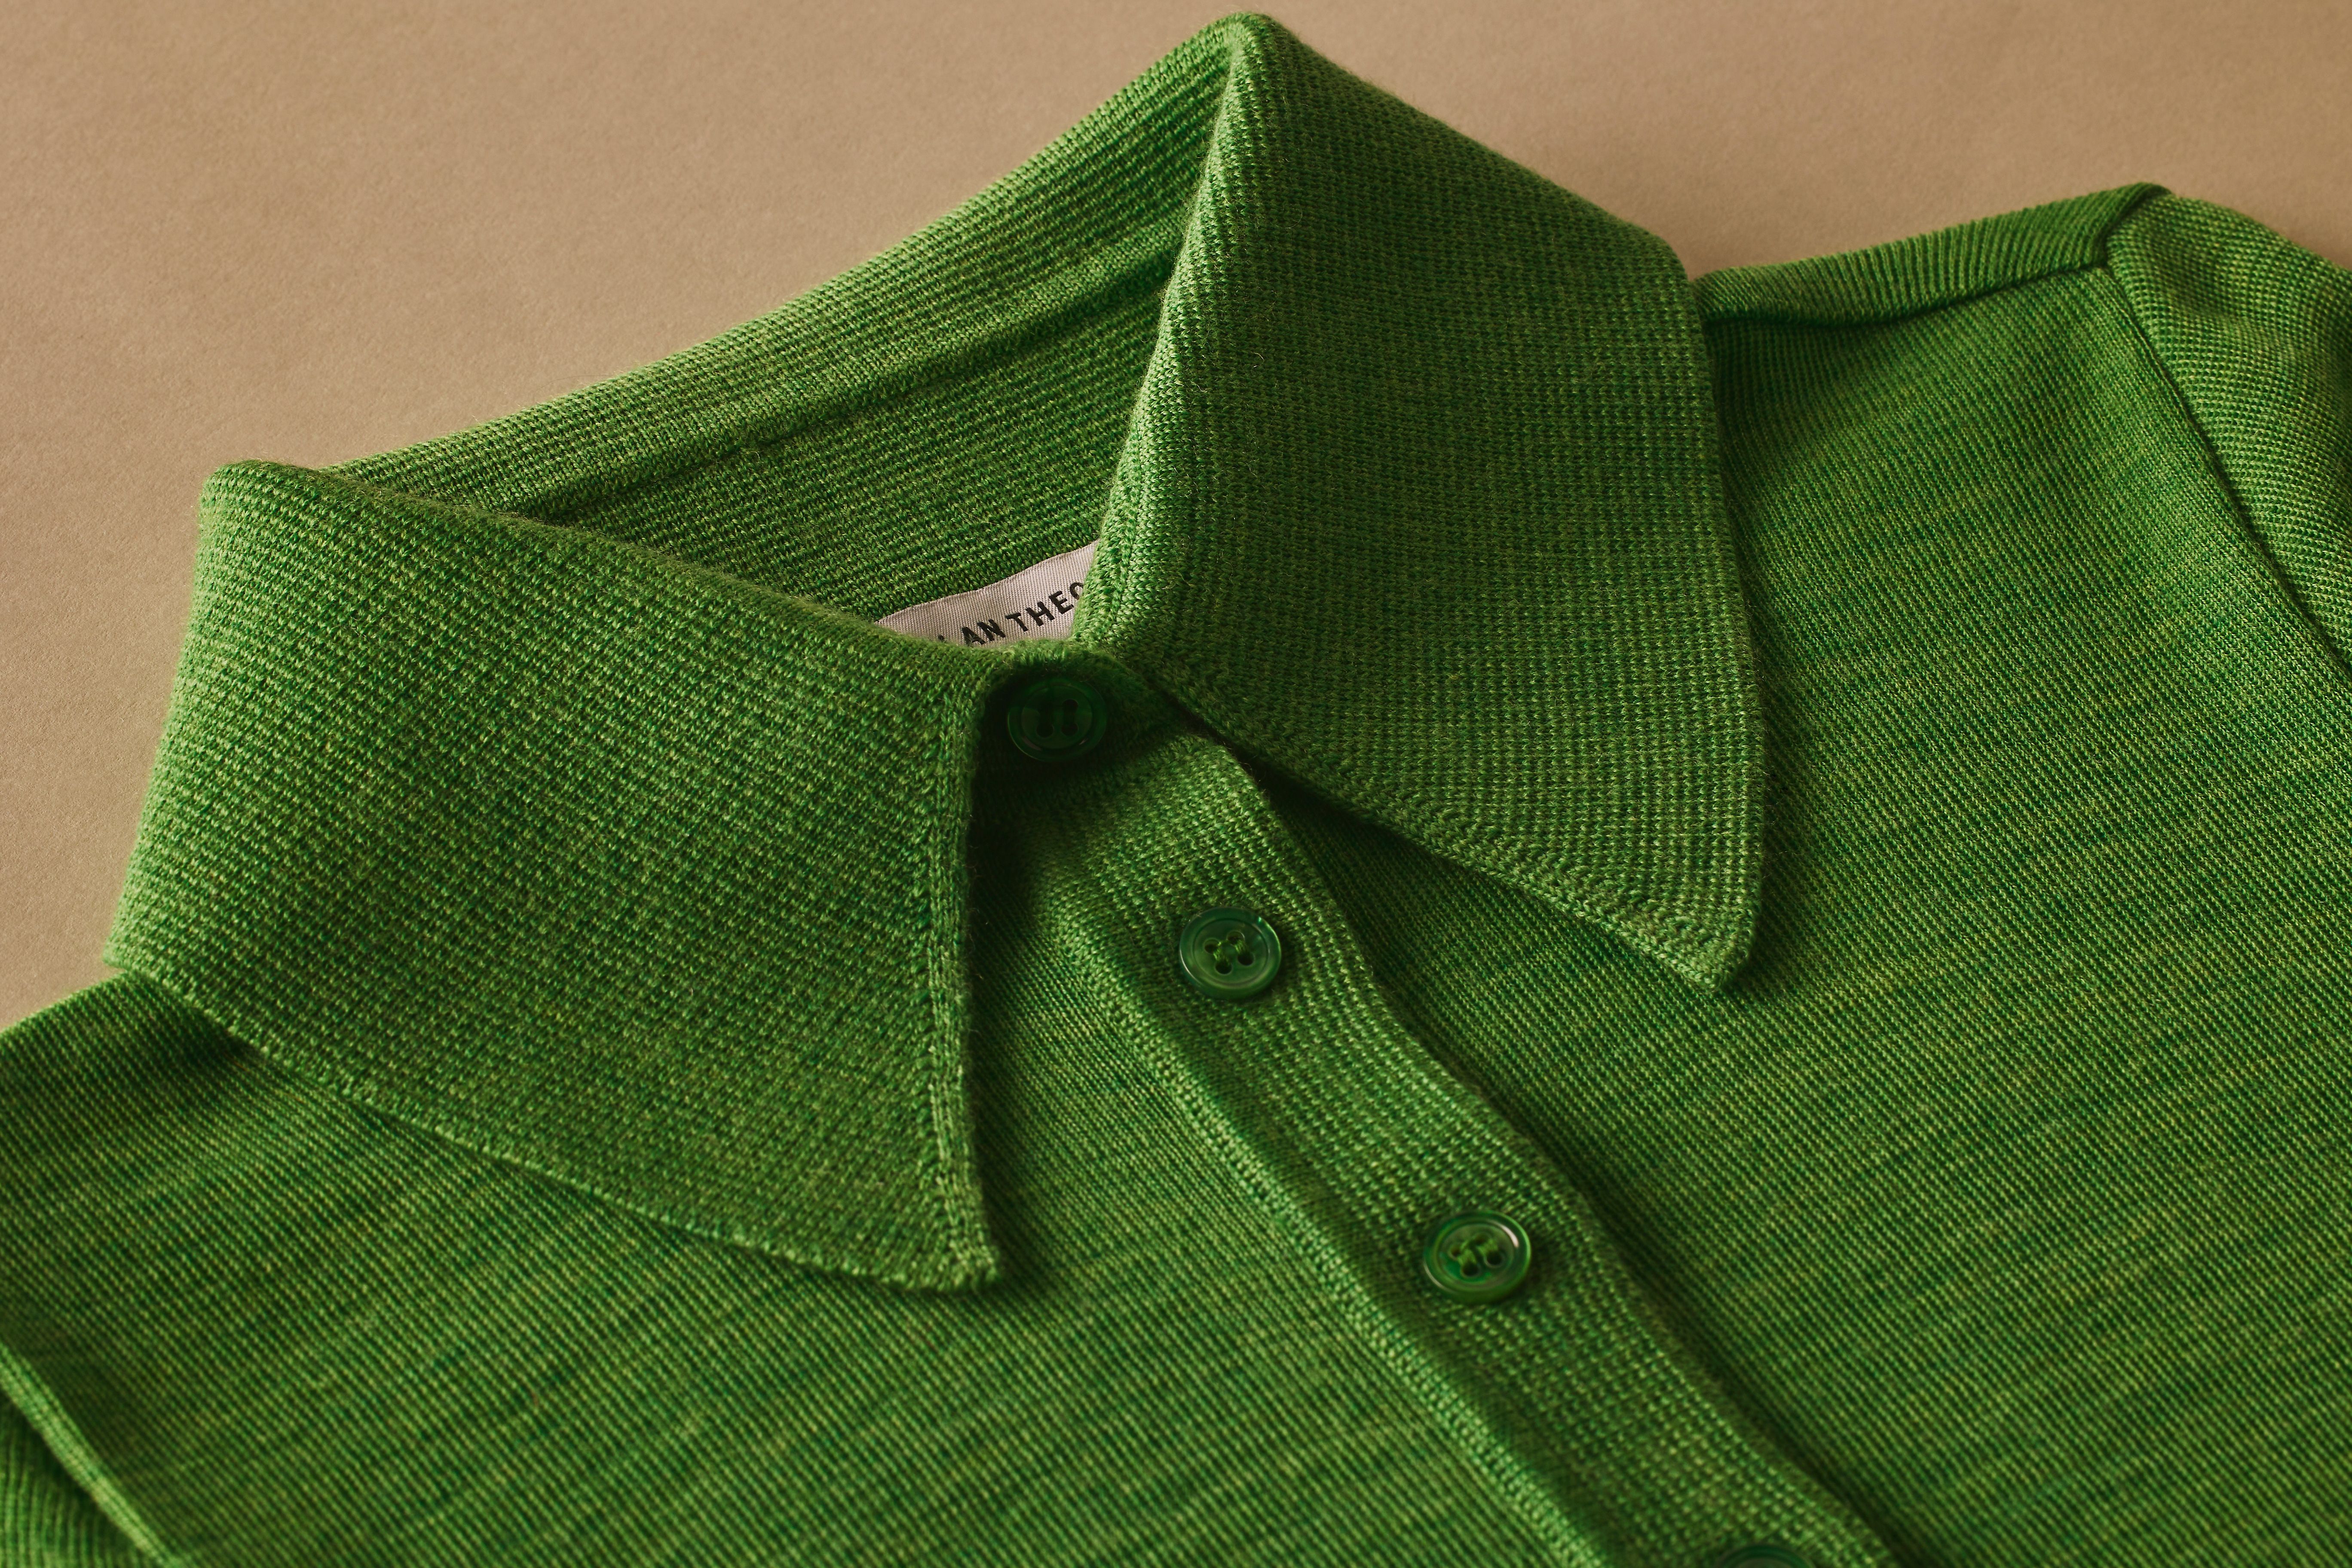 Scanlan Theodore babywool shirt with collar and button up detail.